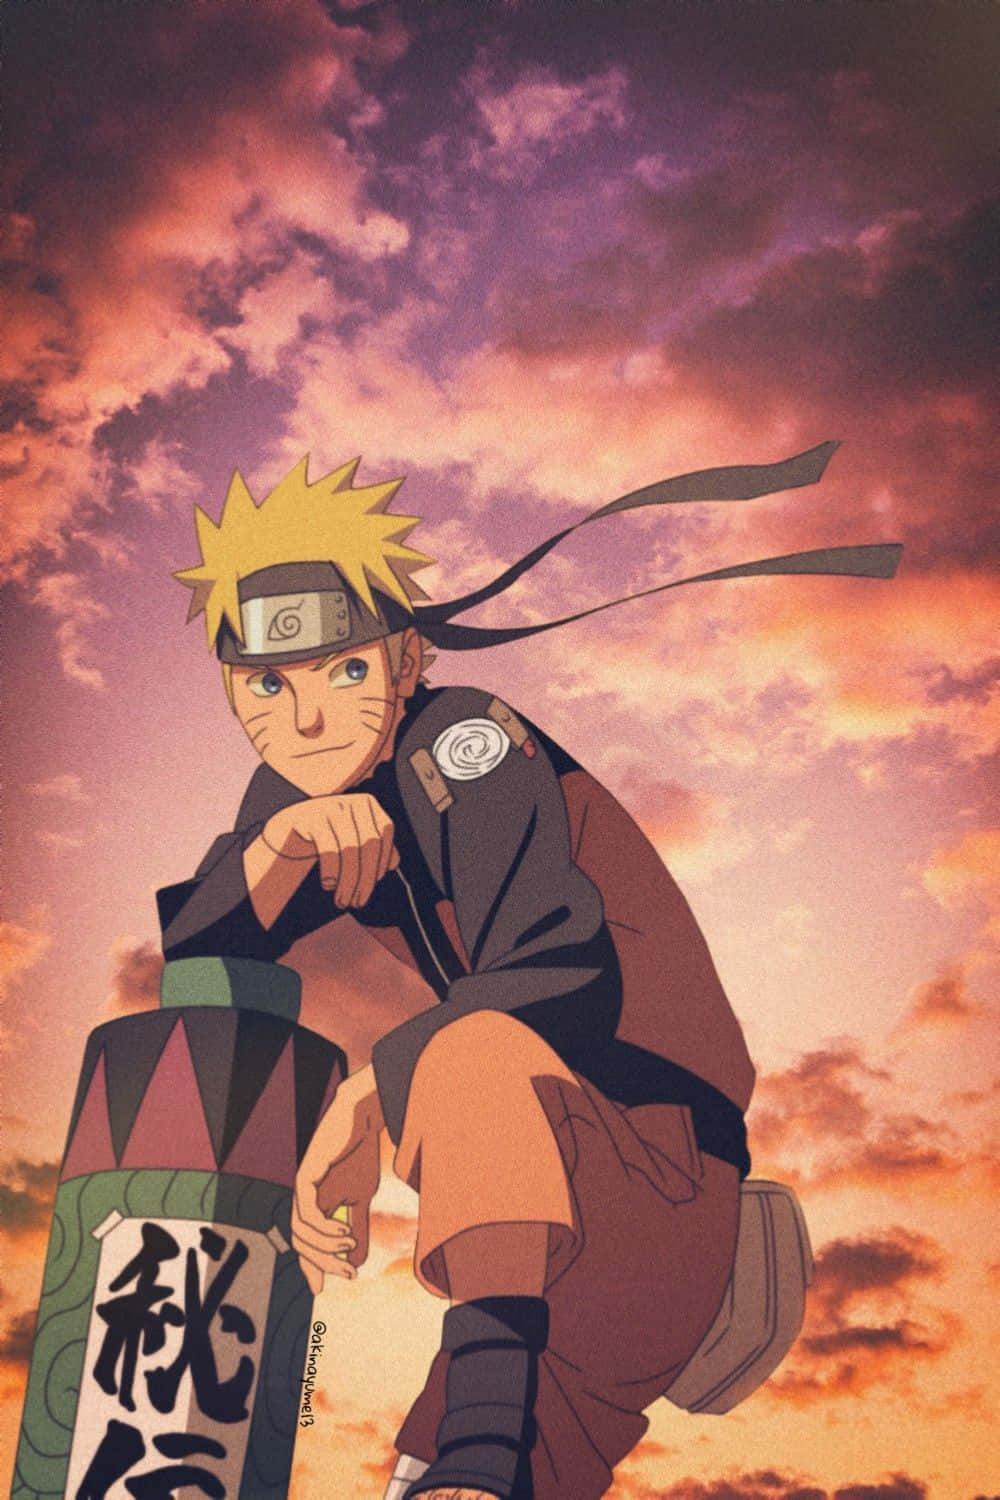 Get lost in the world of the ever popular anime series Naruto Shippuden with this wallart for your iPhone Wallpaper